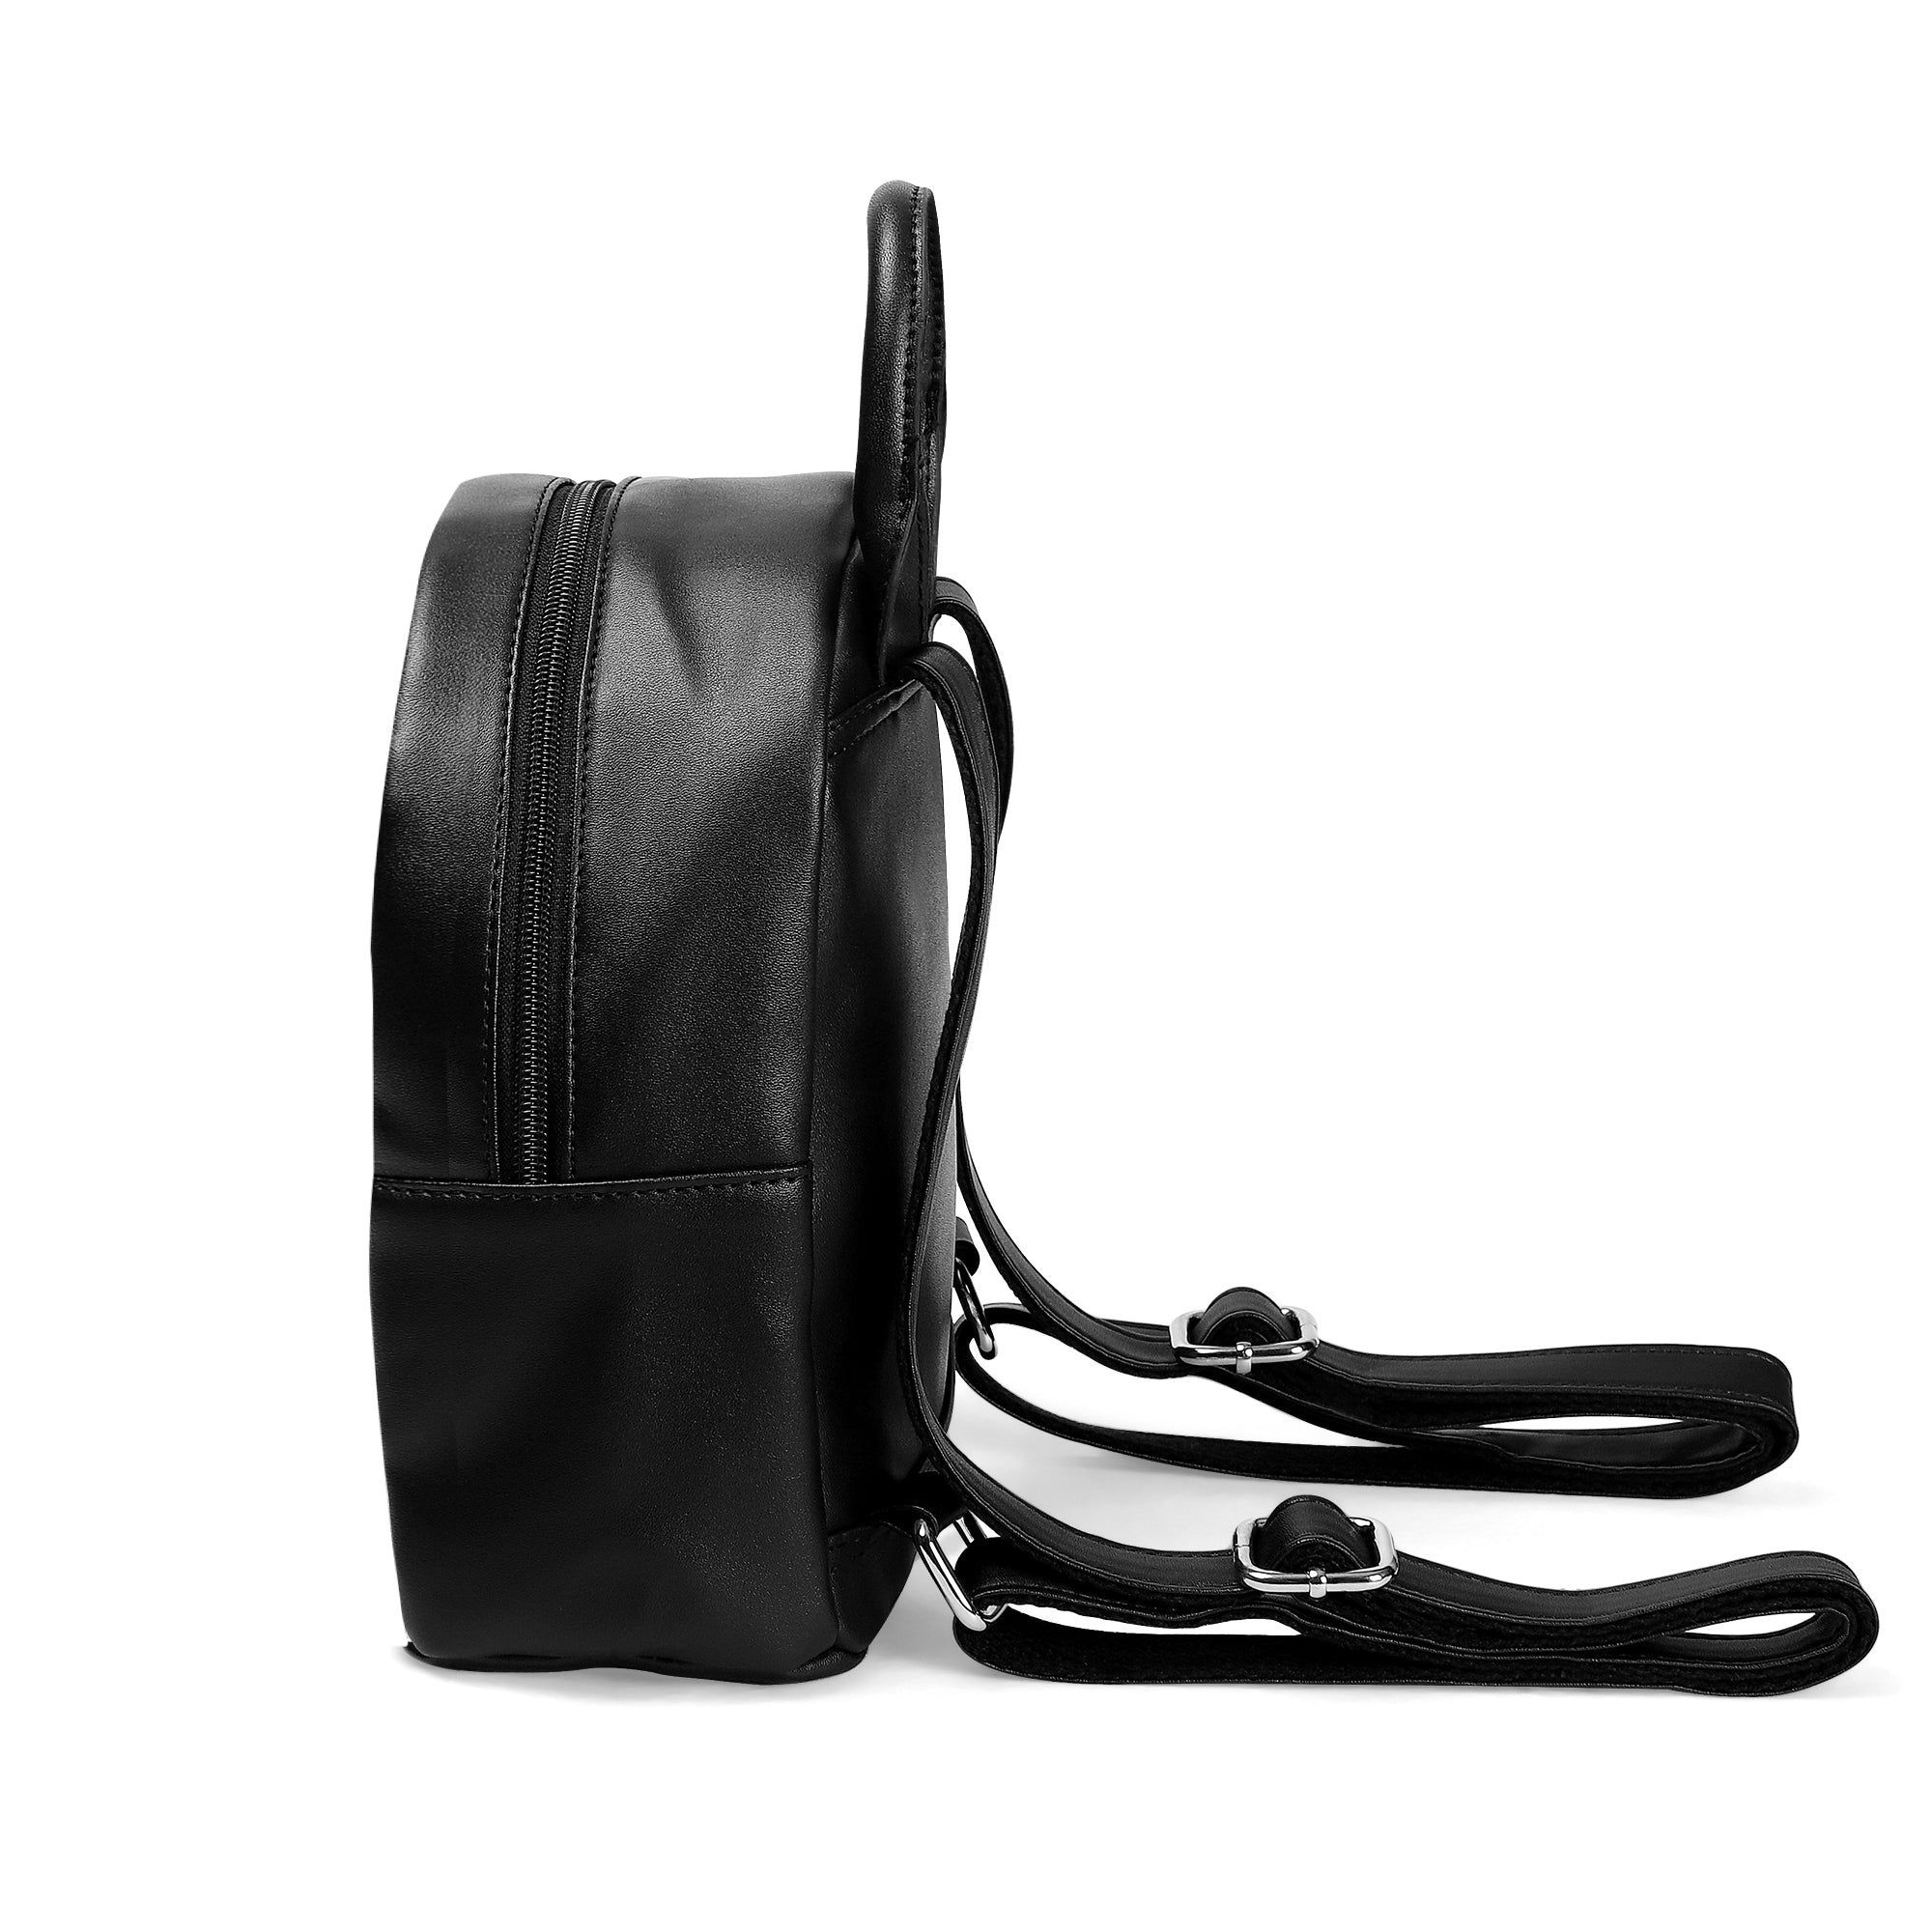 Faux Leather Mini Backpack - Women's Bags in Black